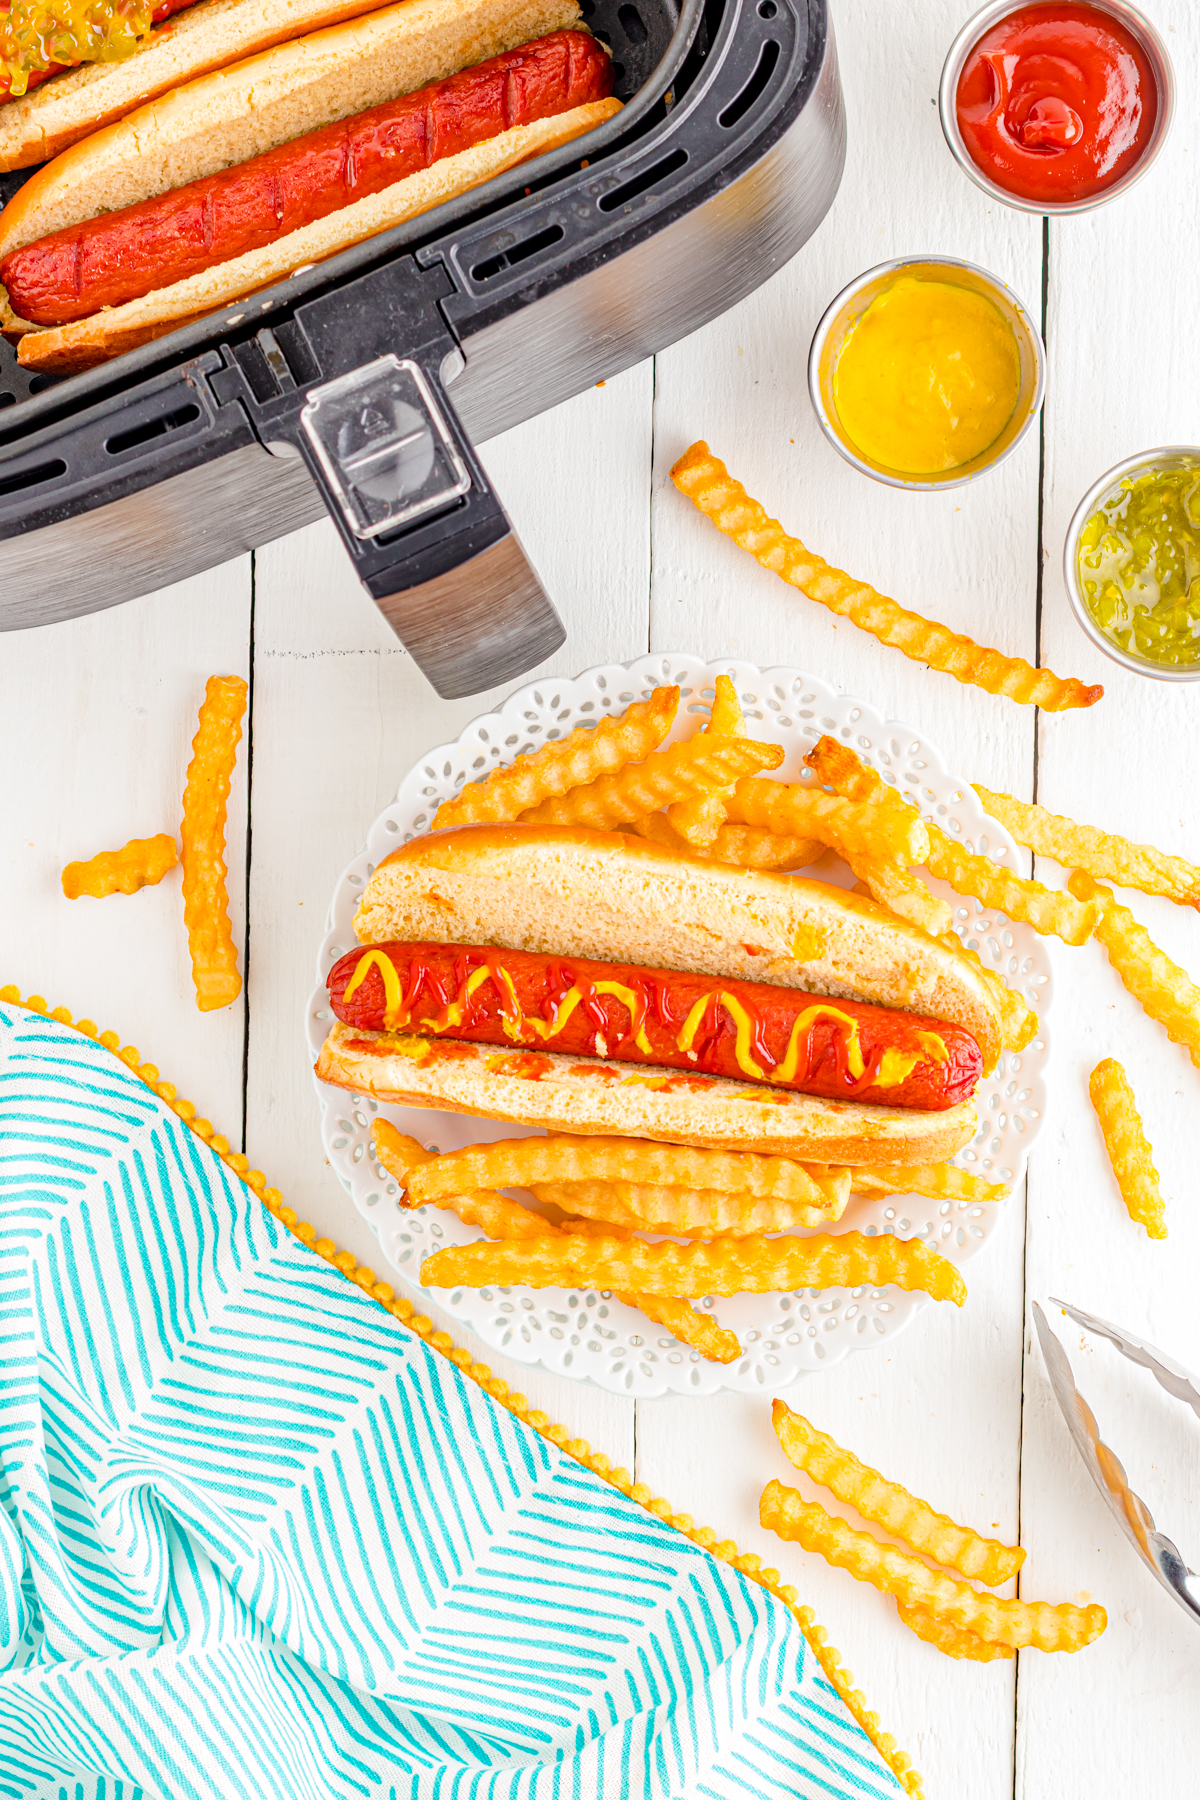 Air fryer hot dogs on table with fries and condiments.